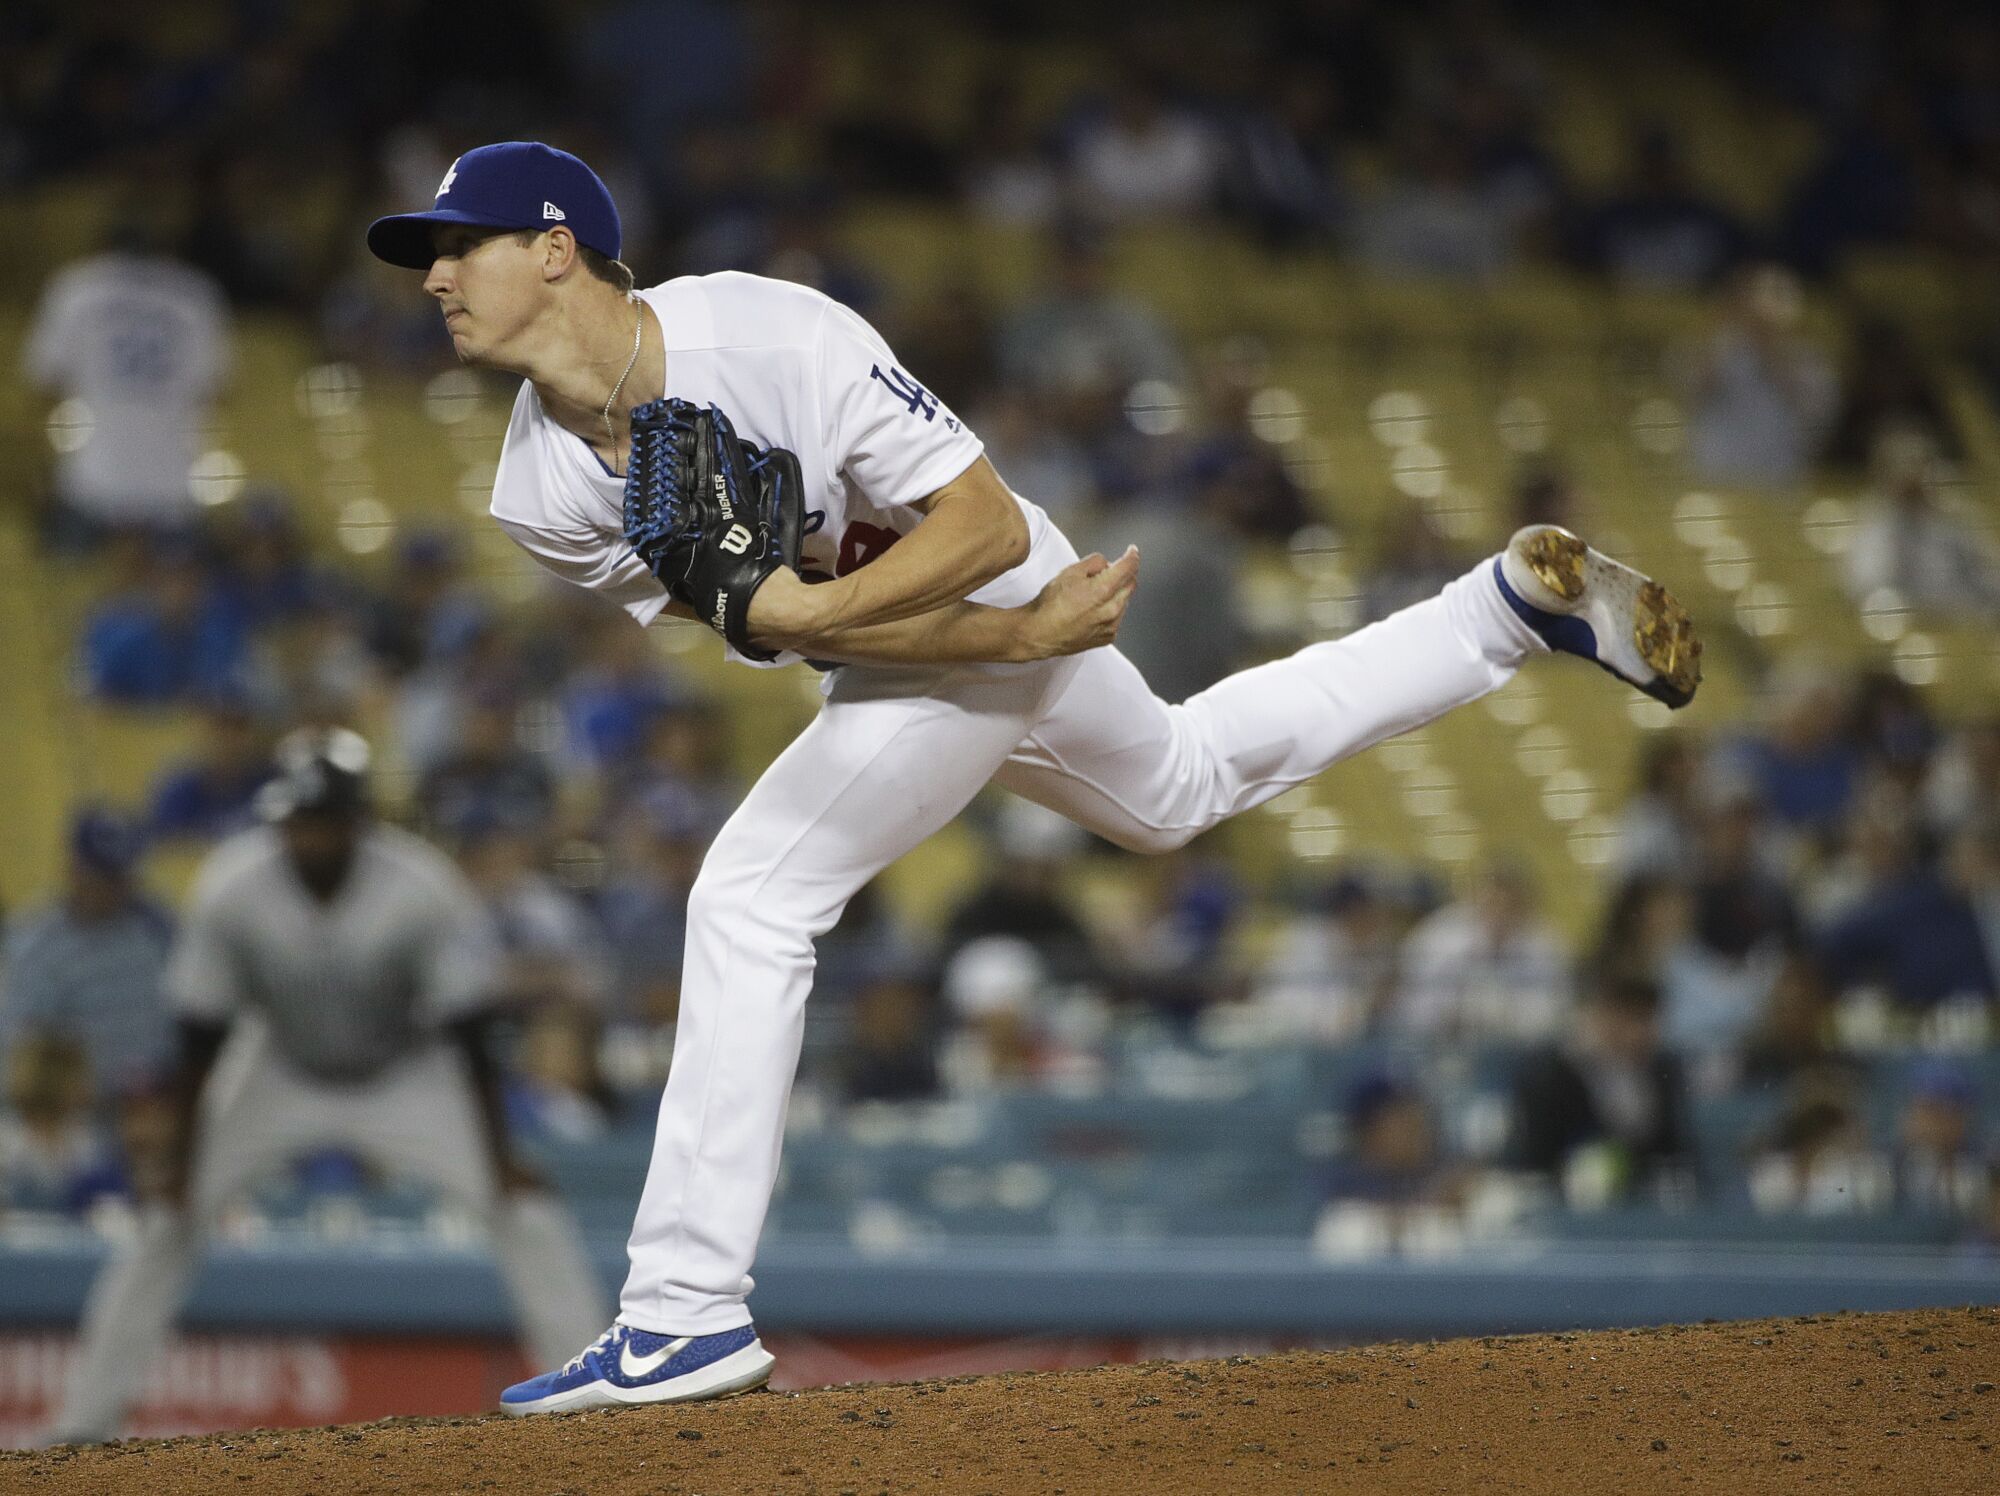 Walker Buehler releases a pitch against the Colorado Rockies on Sept. 7, 2017